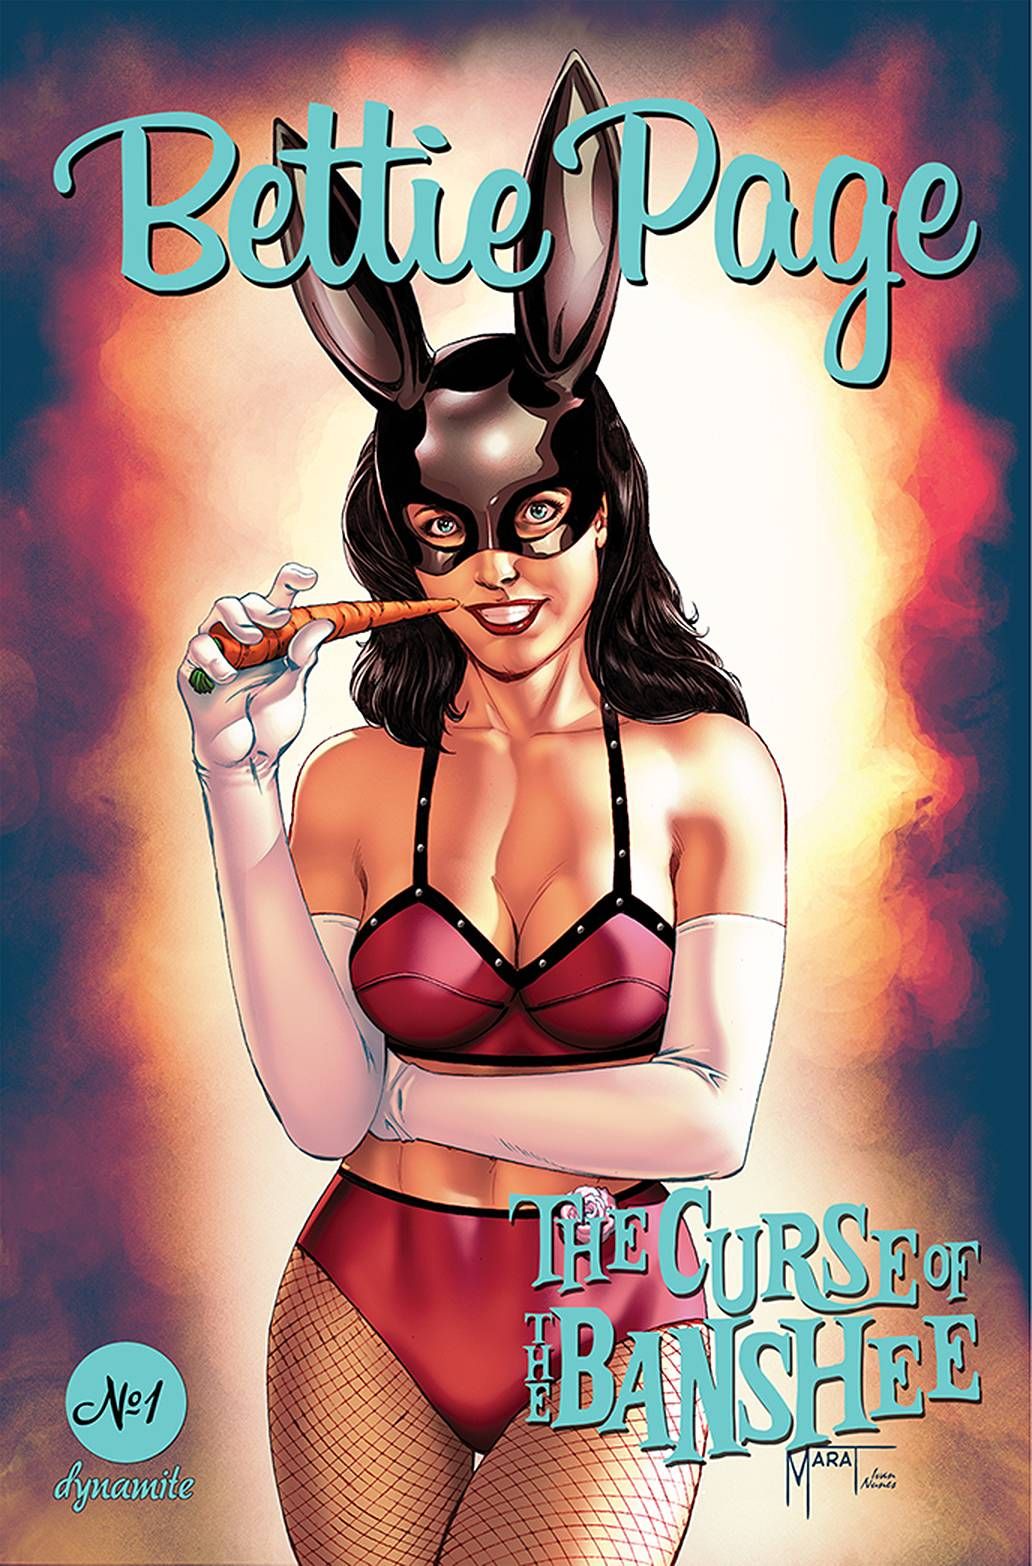 Bettie Page: The Curse of the Banshee #1 Comic